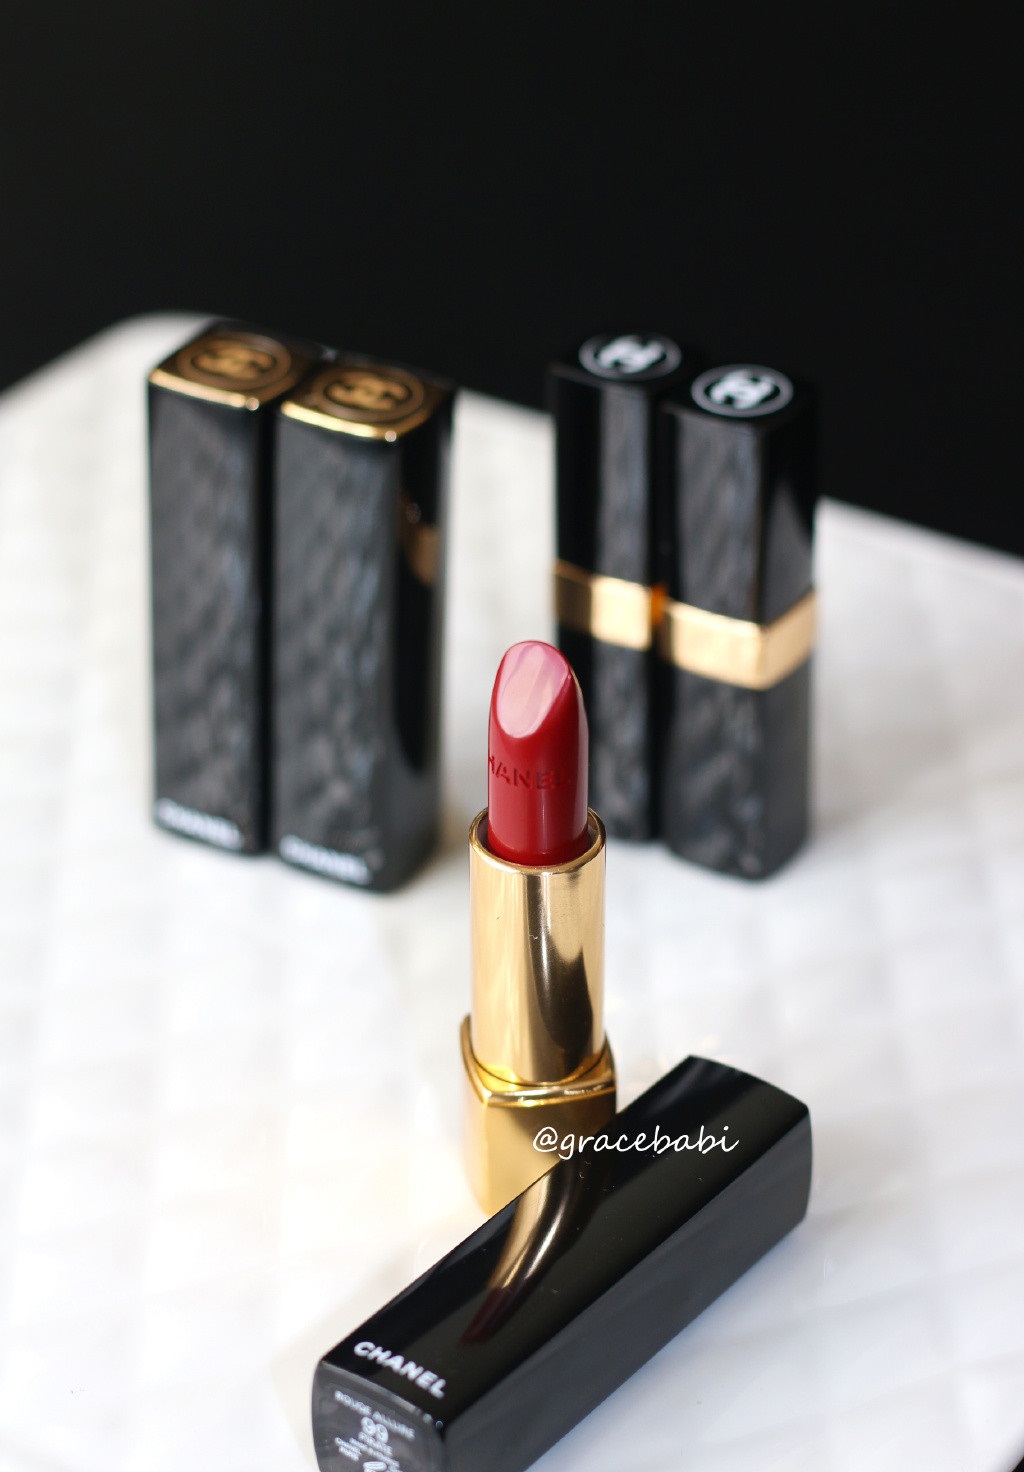 CHANEL香奈儿Rouge Coco Shine 55/56&Chanel Rouge Allure 96/99/138试色